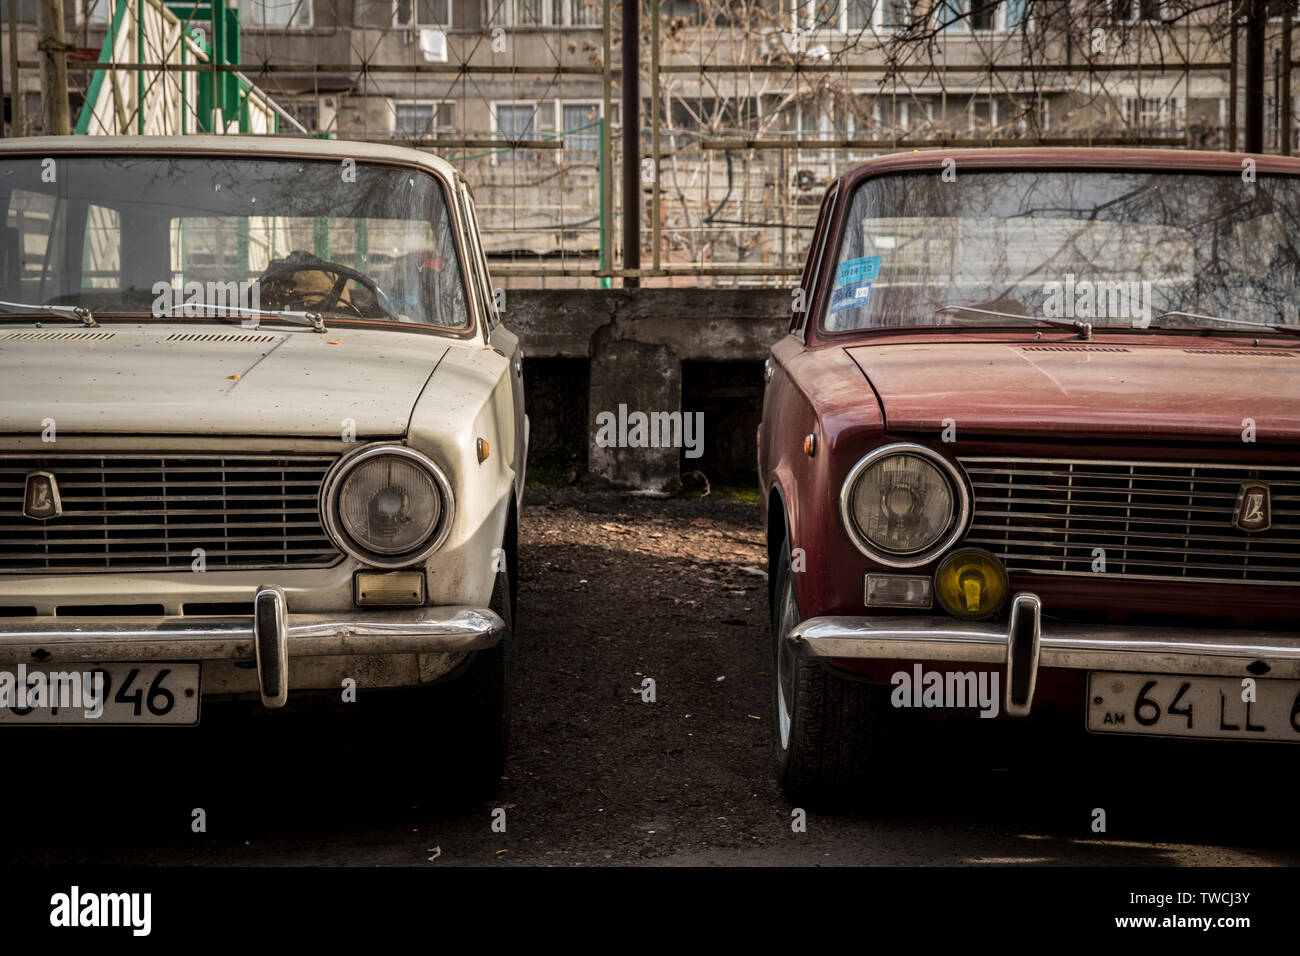 Red and white Lada cars parked in Yerevan. Armenia Stock Photo